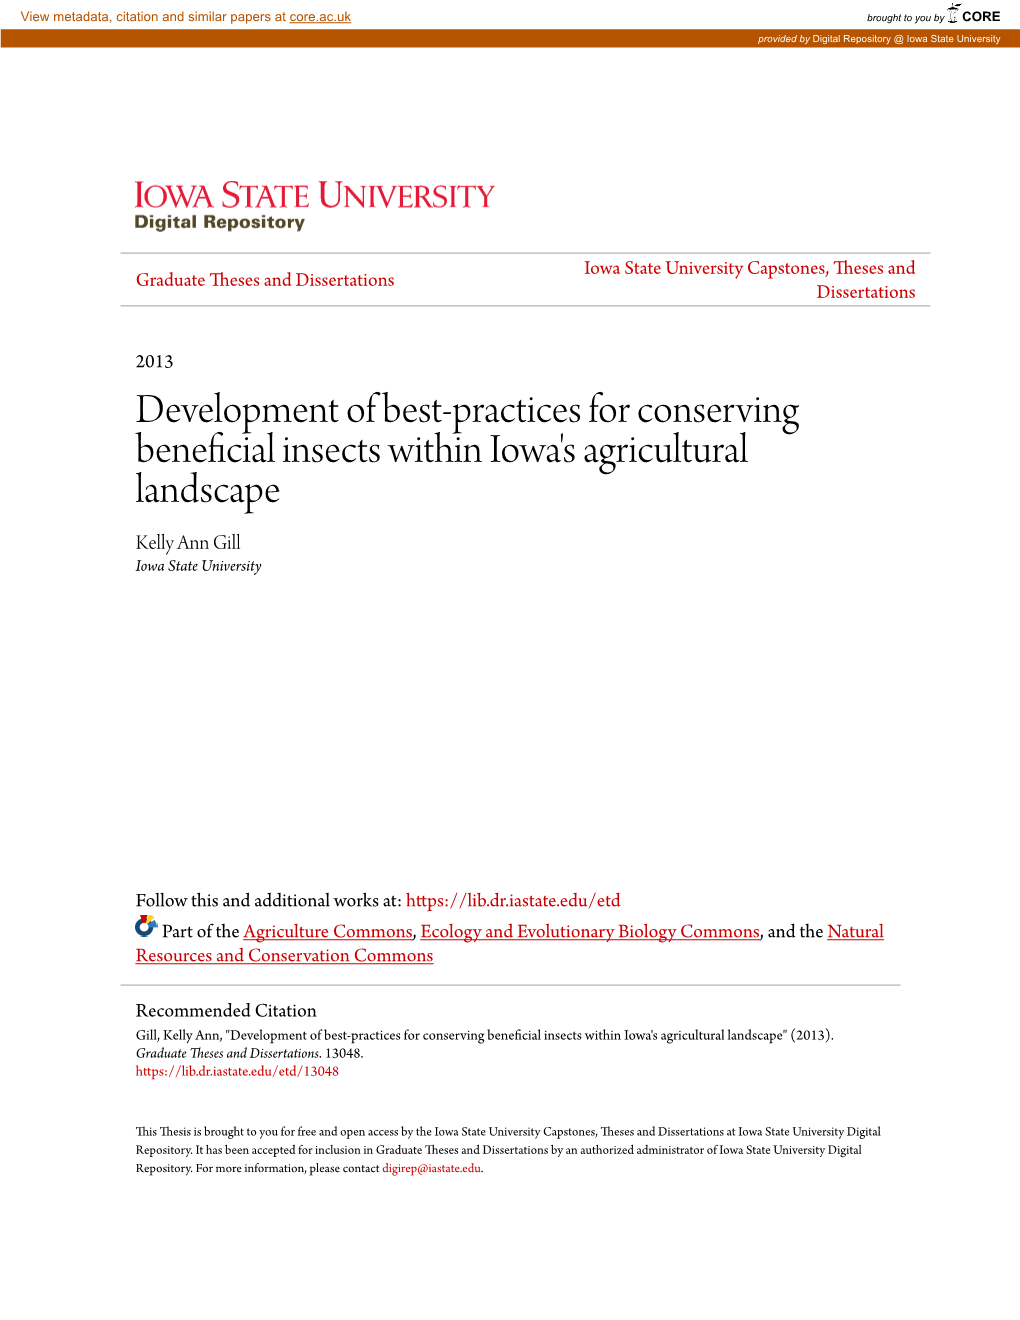 Development of Best-Practices for Conserving Beneficial Insects Within Iowa's Agricultural Landscape Kelly Ann Gill Iowa State University